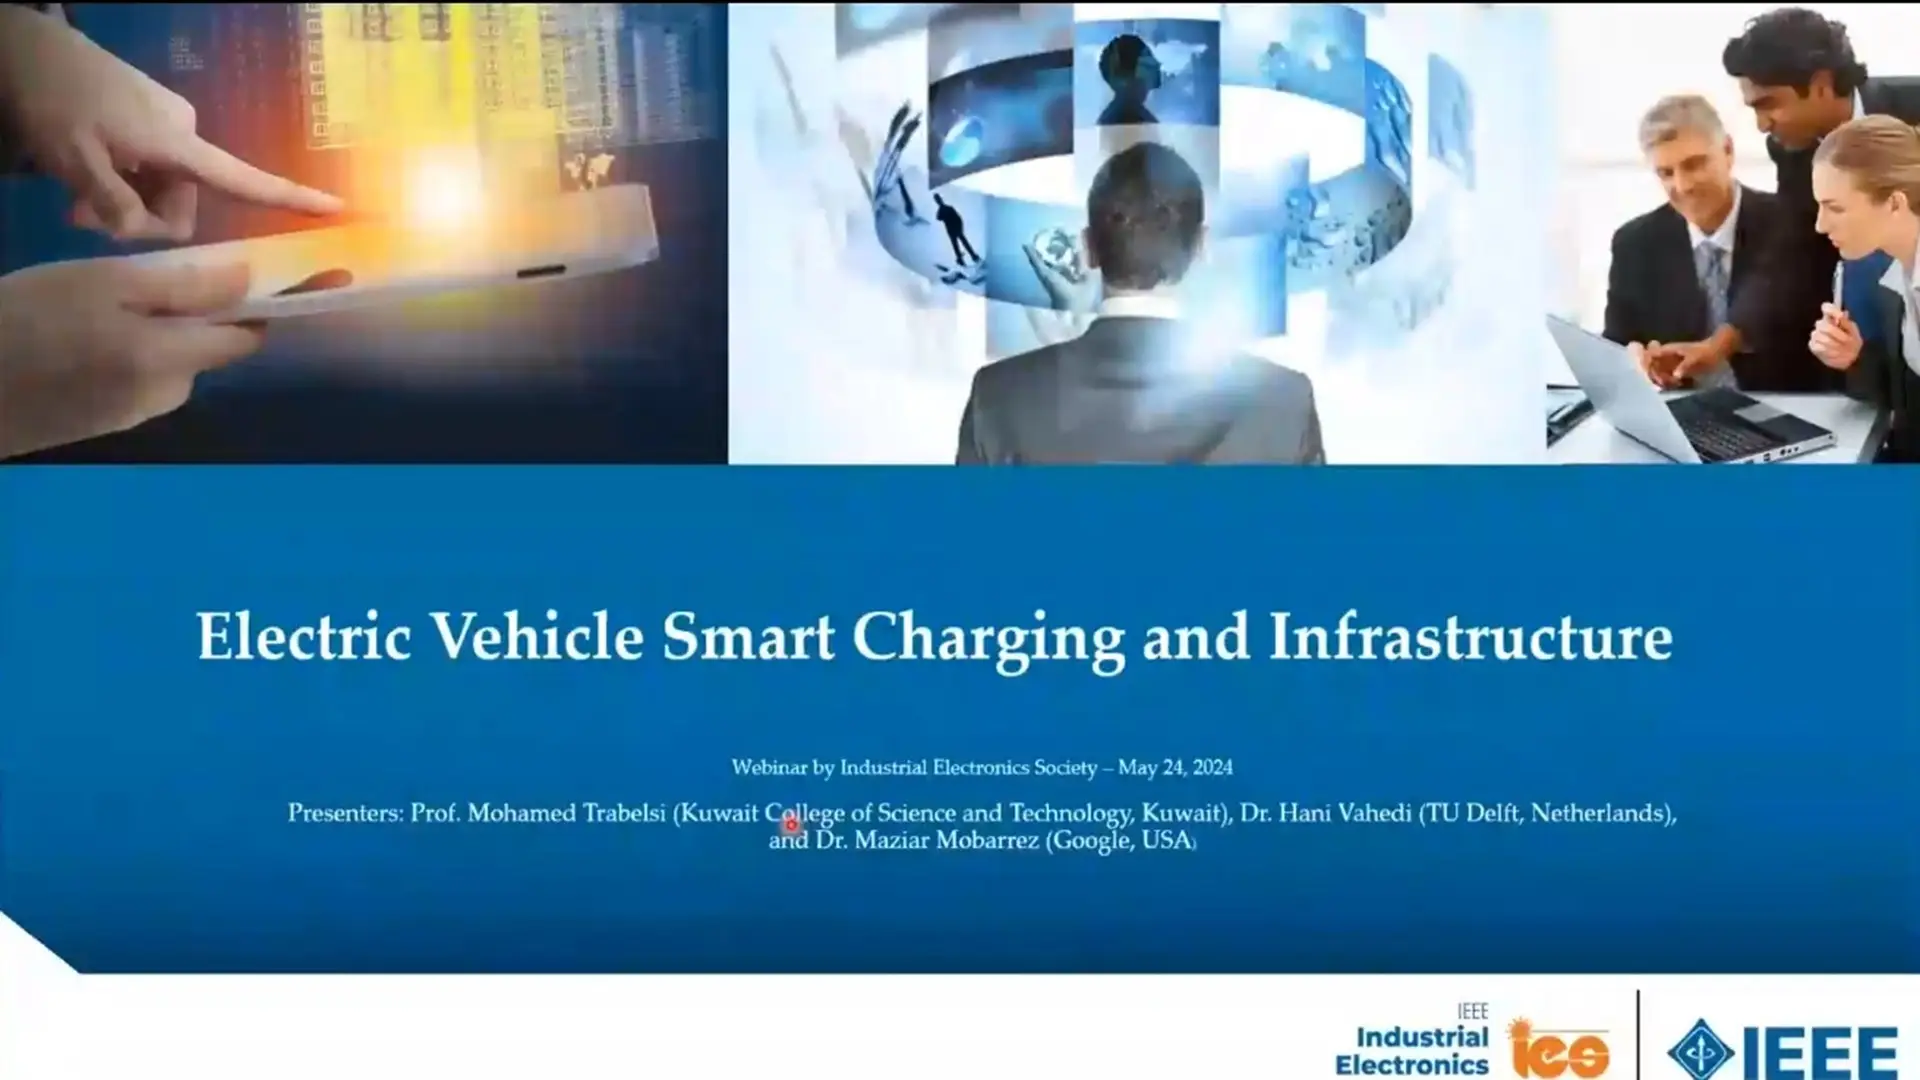 Electric Vehicle Smart Charging and Infrastructure